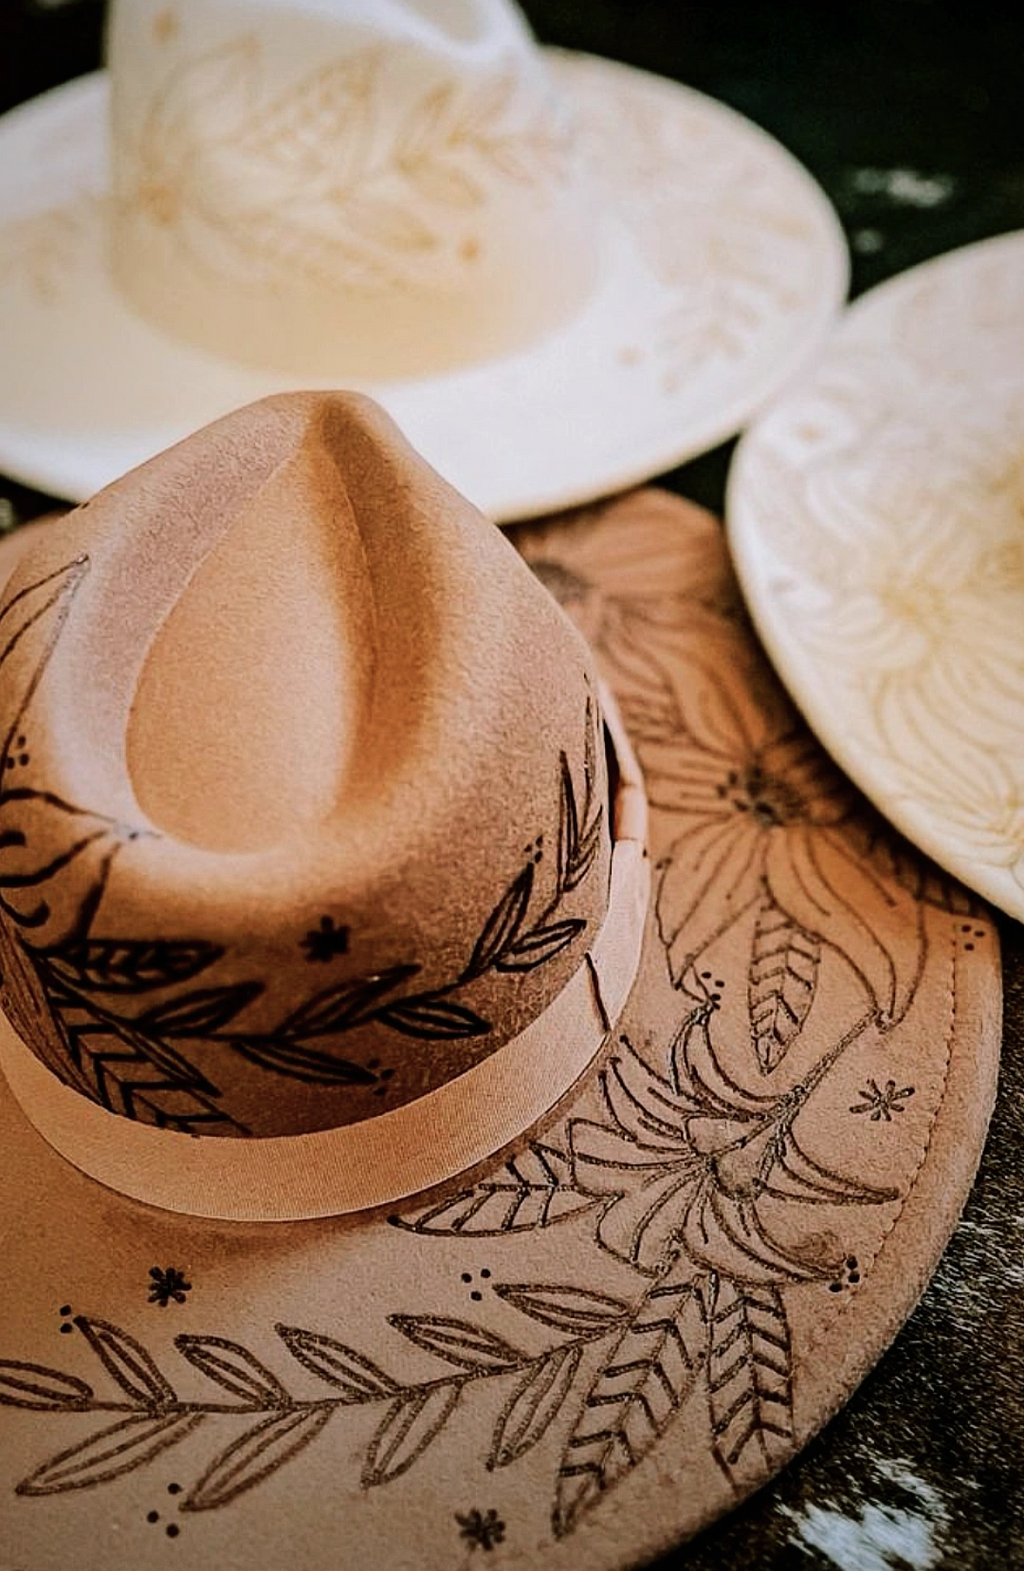 INTRODUCTION TO HAT BURING & DRIED FLOWER WORKSHOP 9th June 10am Central Coast, NSW